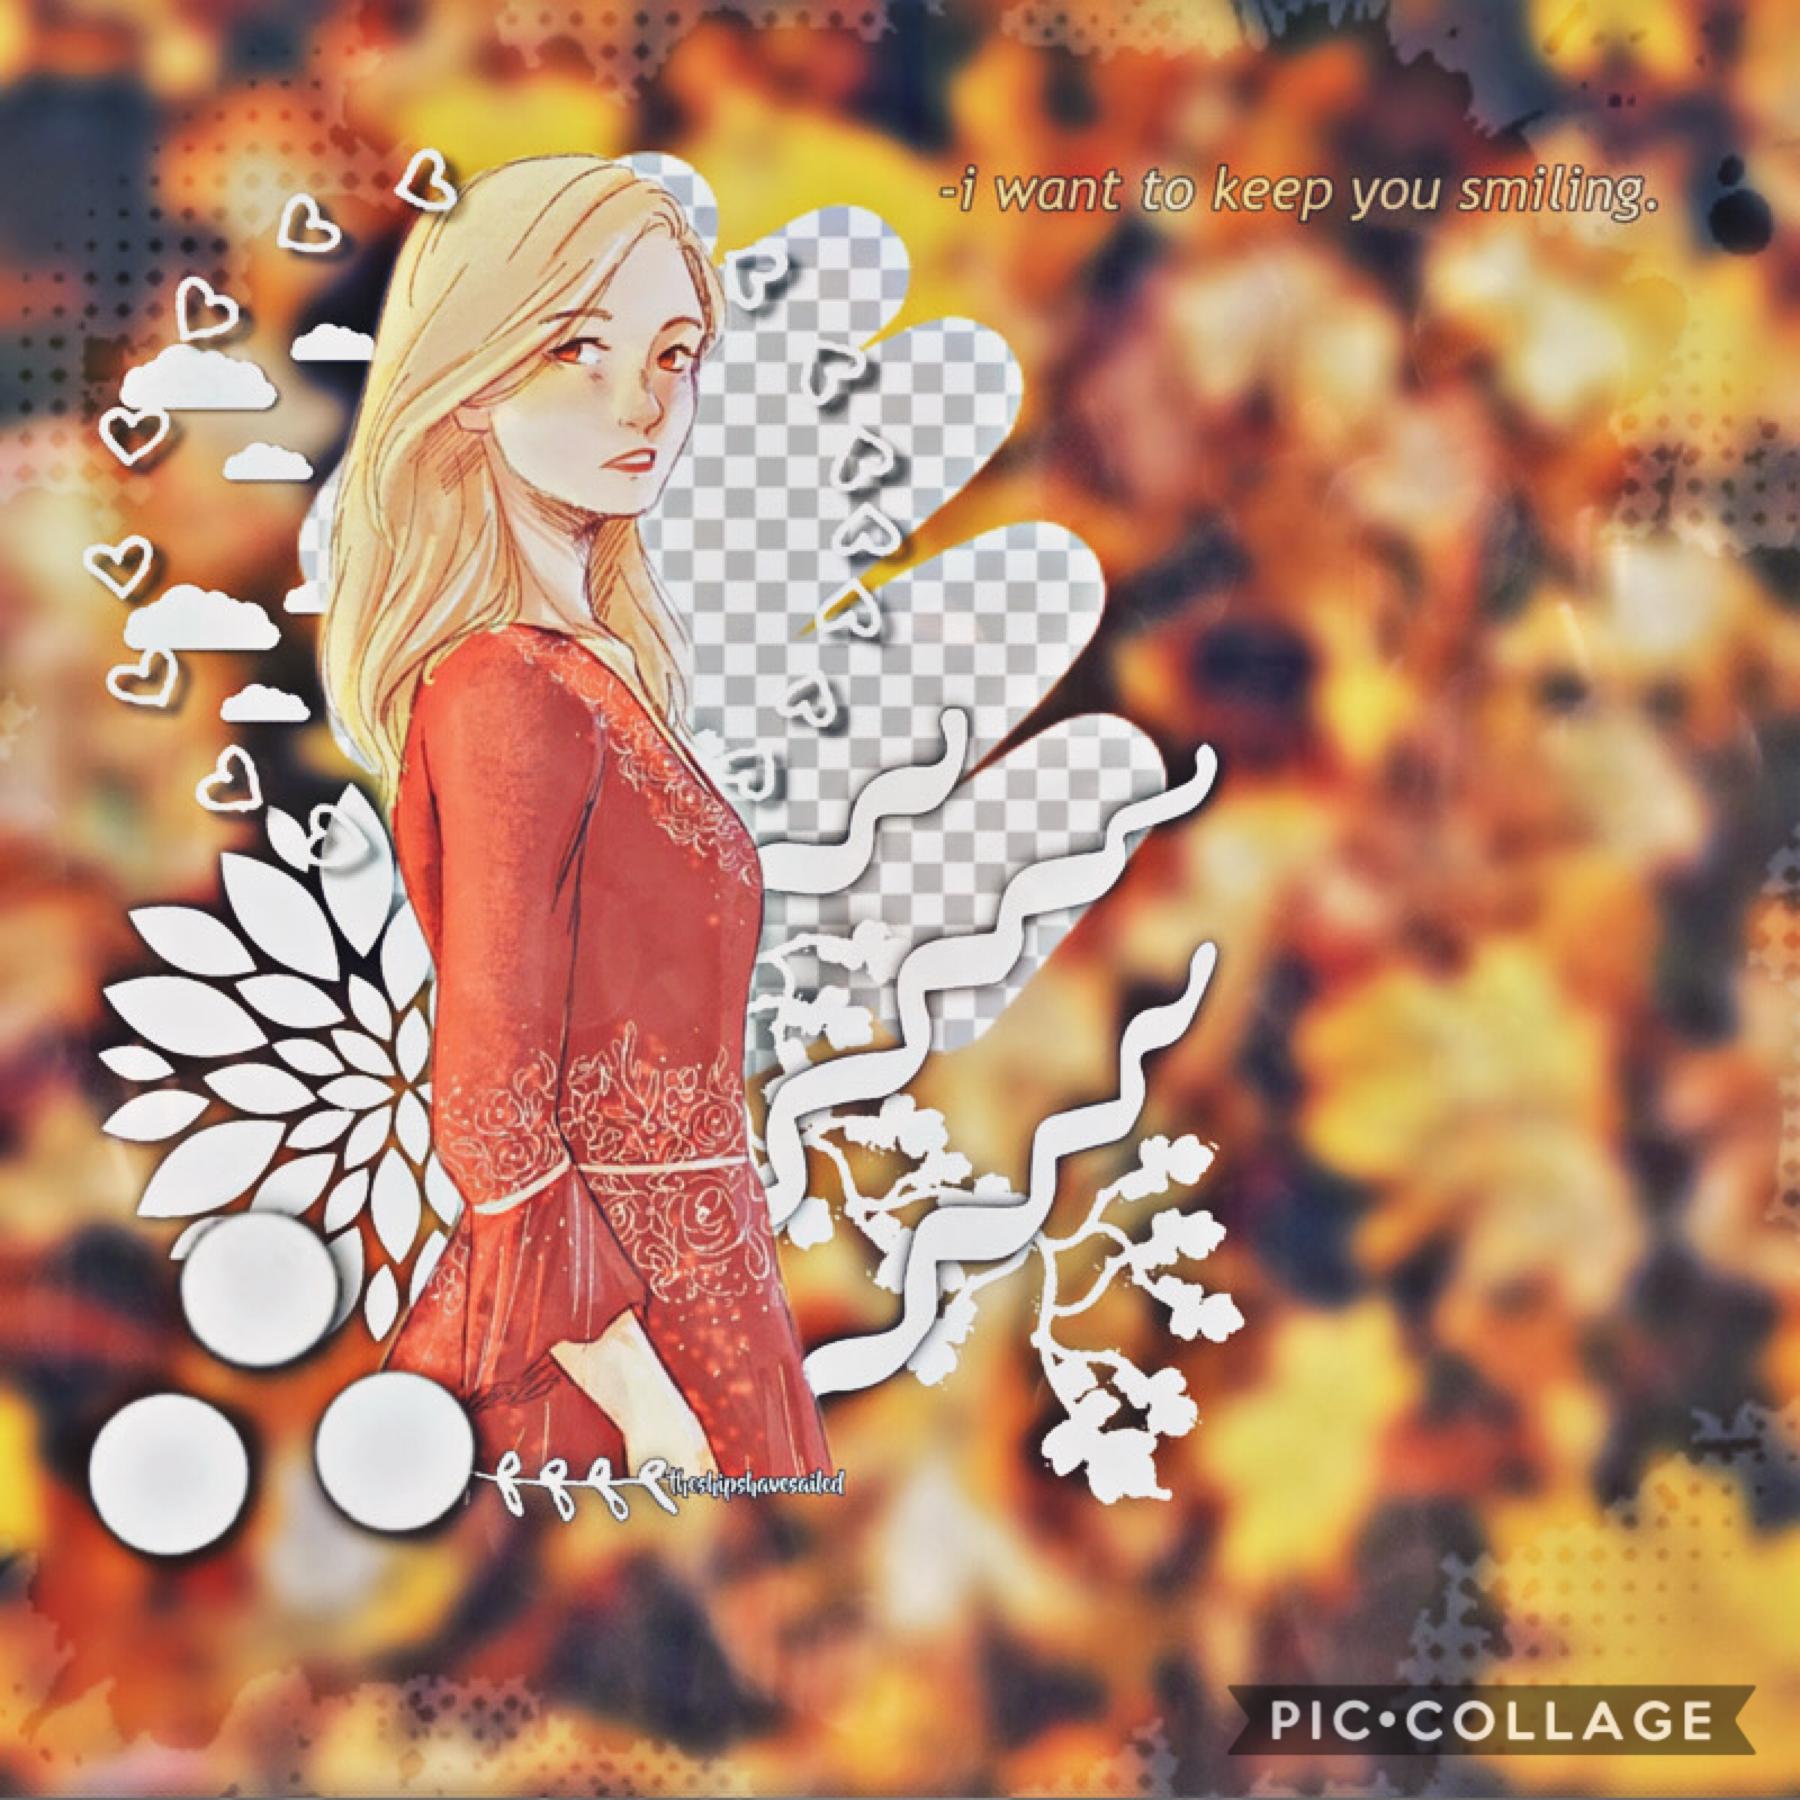 🤎Made on PicsArt🤎  KOTLC Sophie edit! I finished Neverseen last night and duuuuuuuuuuude (hehe not gonna go any further). Anyway how’ve y’all been? I know I haven’t been active that much lately, but school and cheer is driving me nuts. Hope y’all have a g